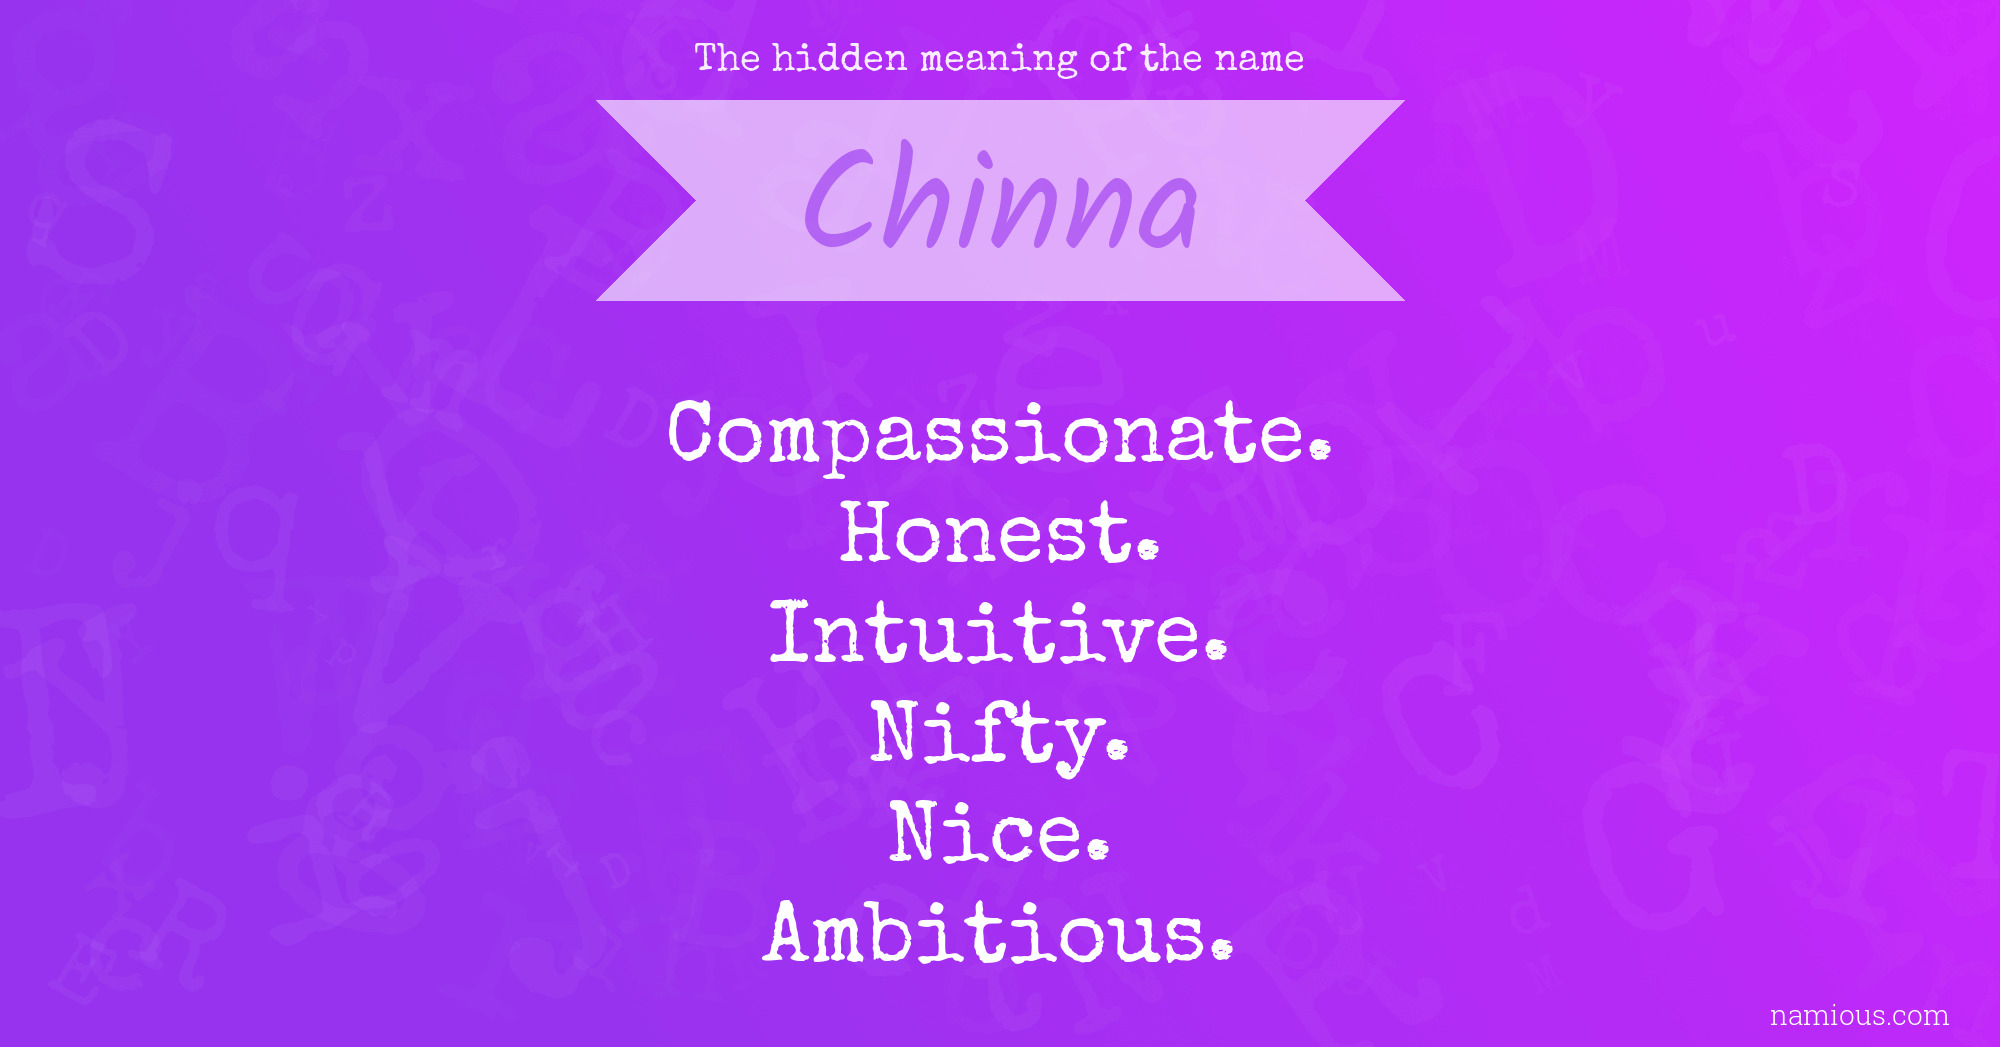 The hidden meaning of the name Chinna